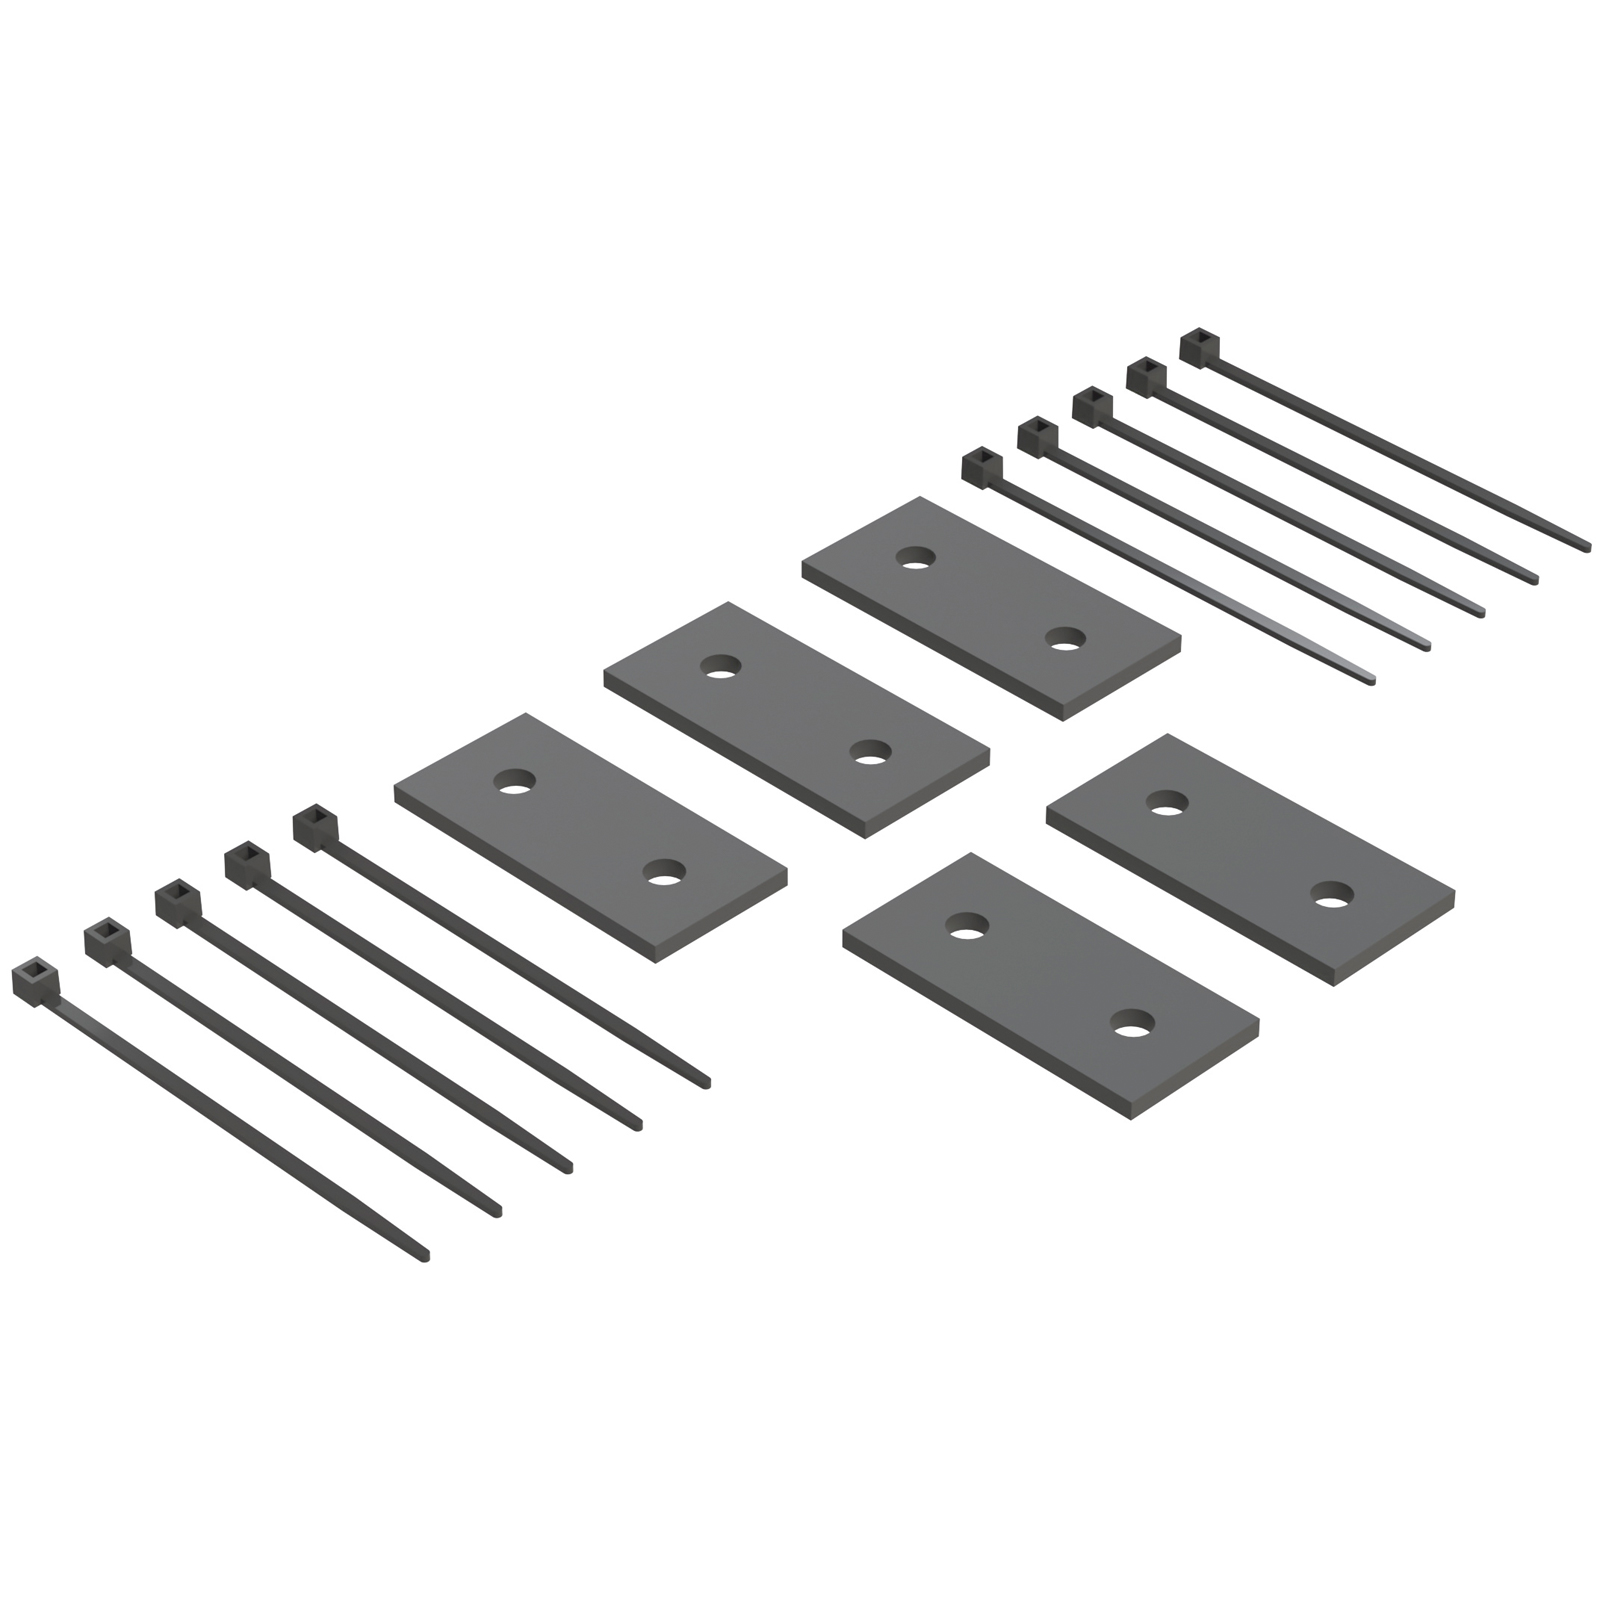 5x Spacer for Heating cable incl. 10 cable ties